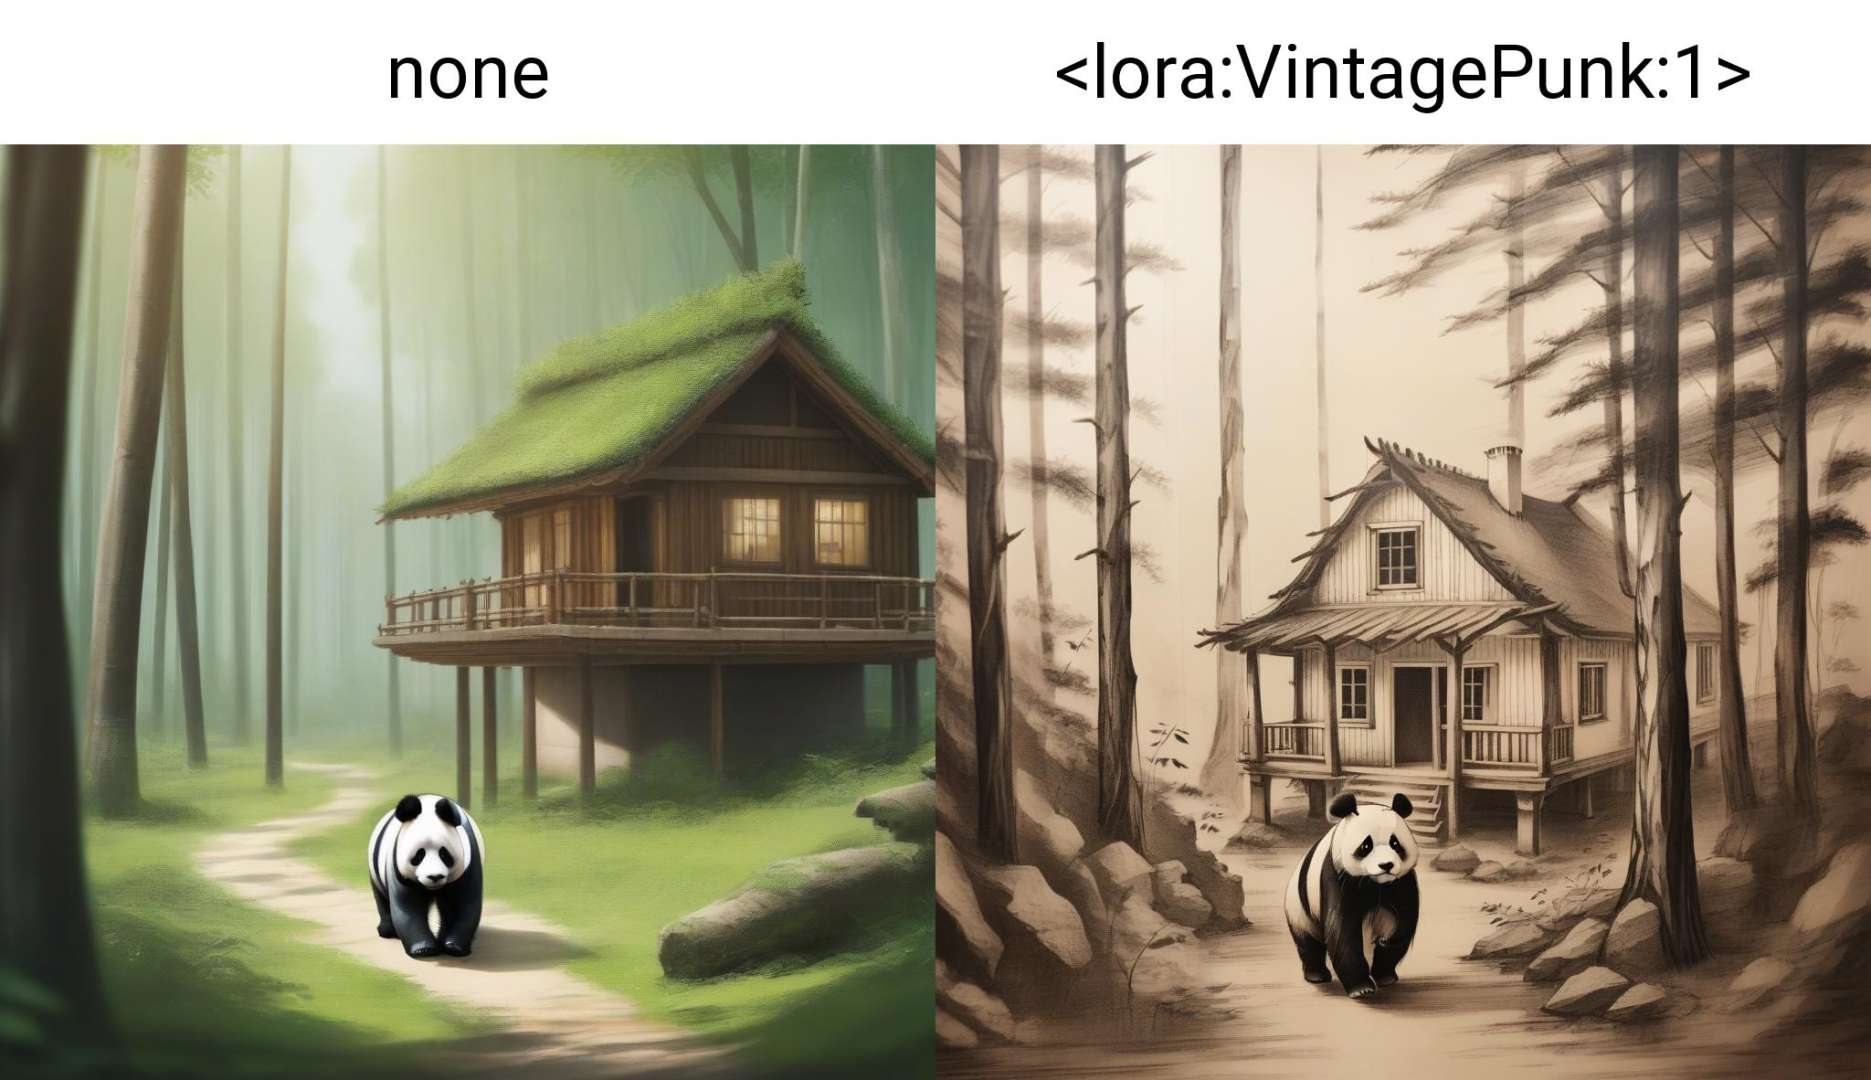 a panda walking in a forest, wooden house, none